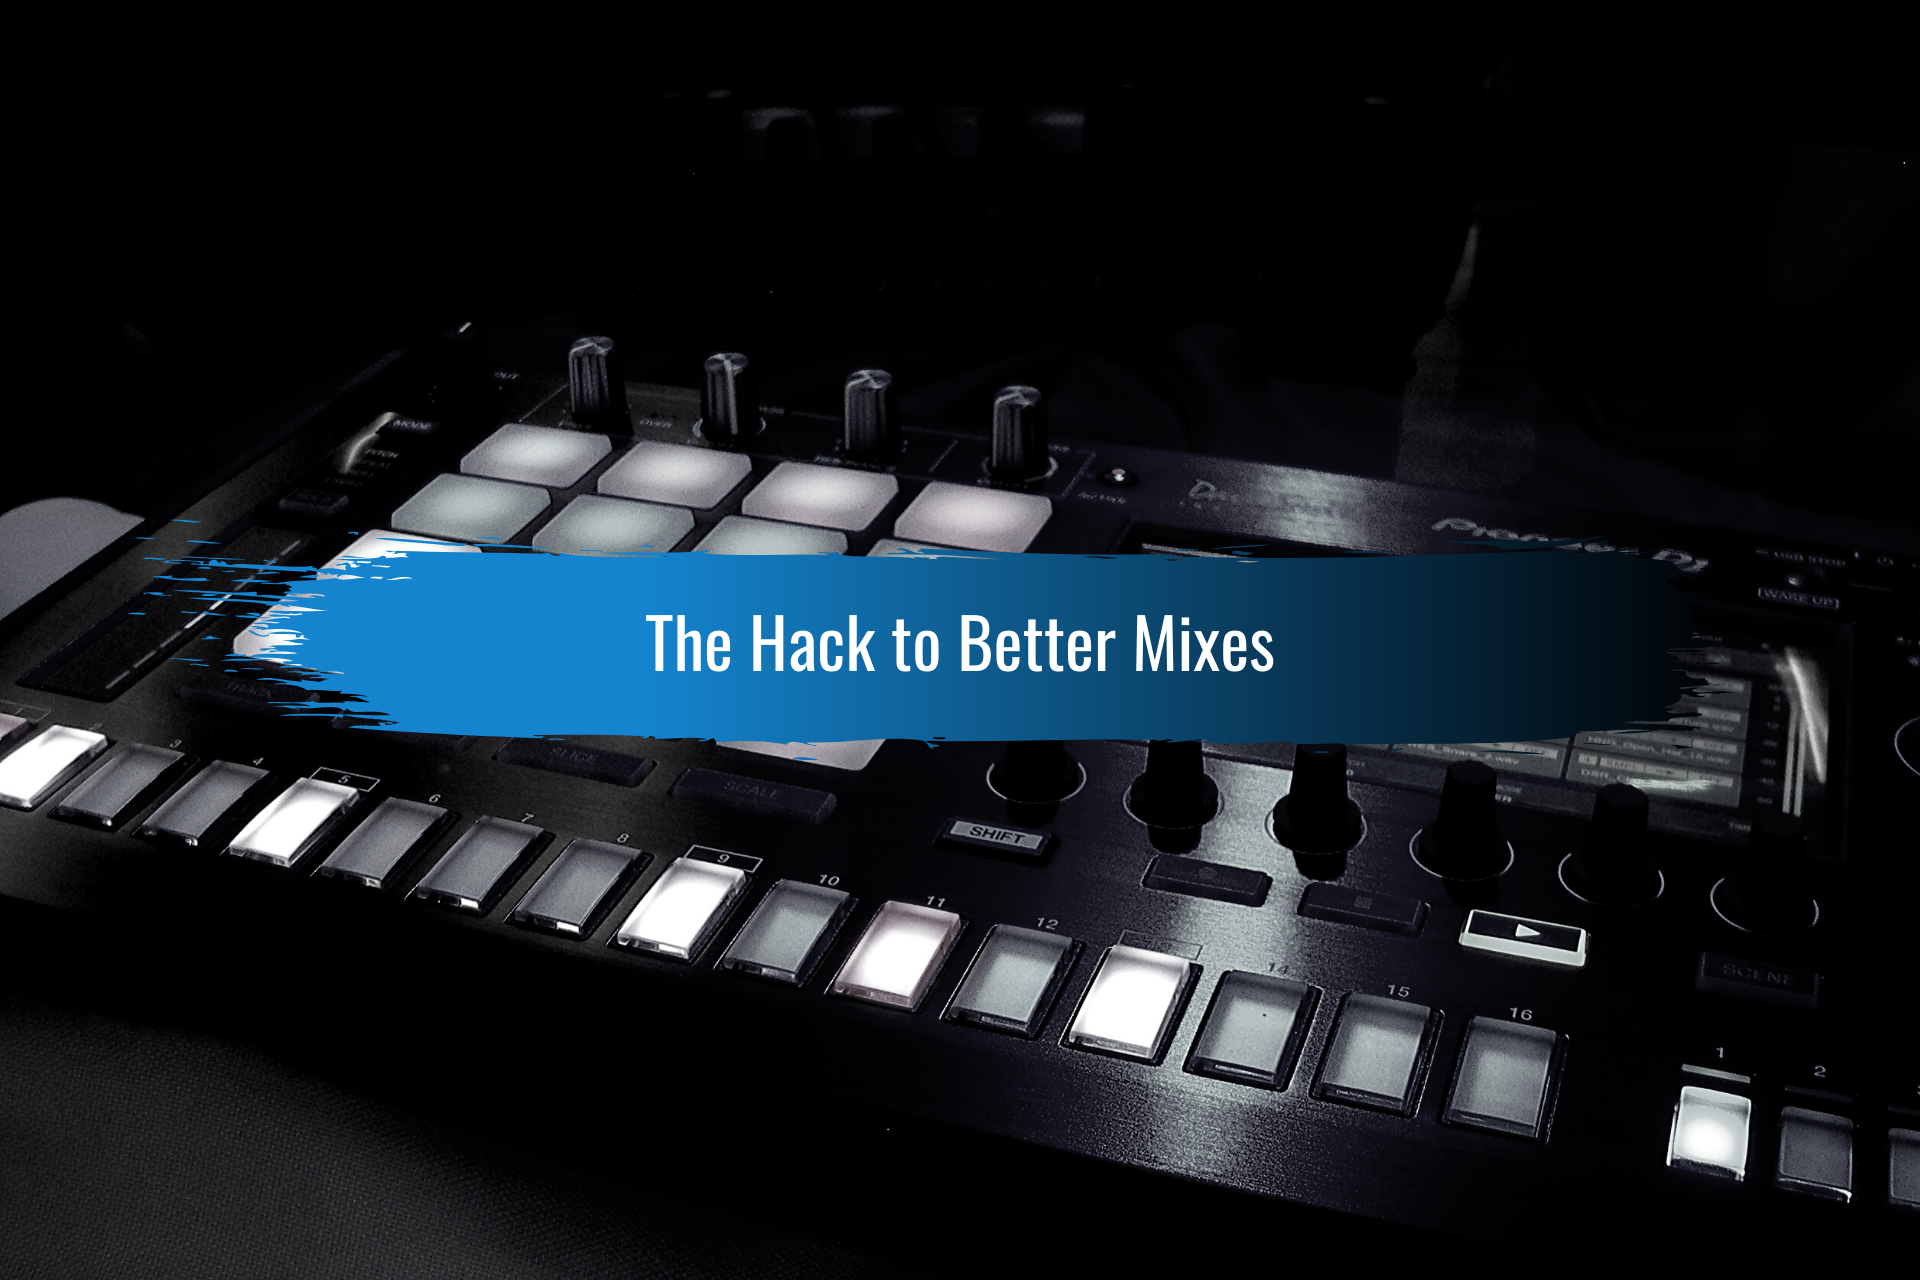 The Hack to Better Mixes